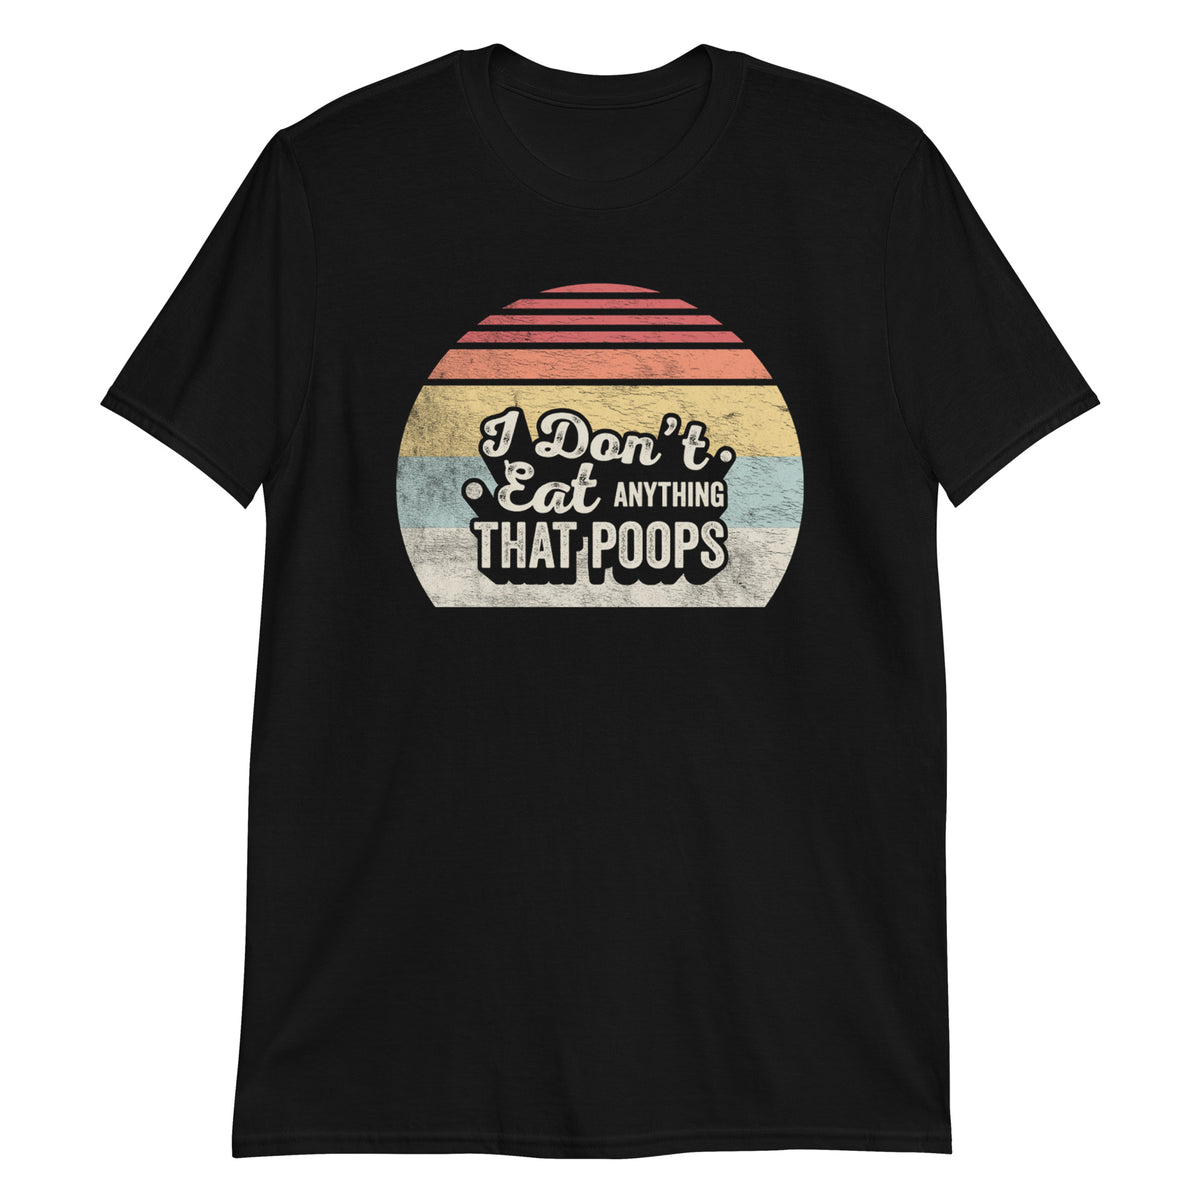 I Don't Eat Anything That Poops T-Shirt